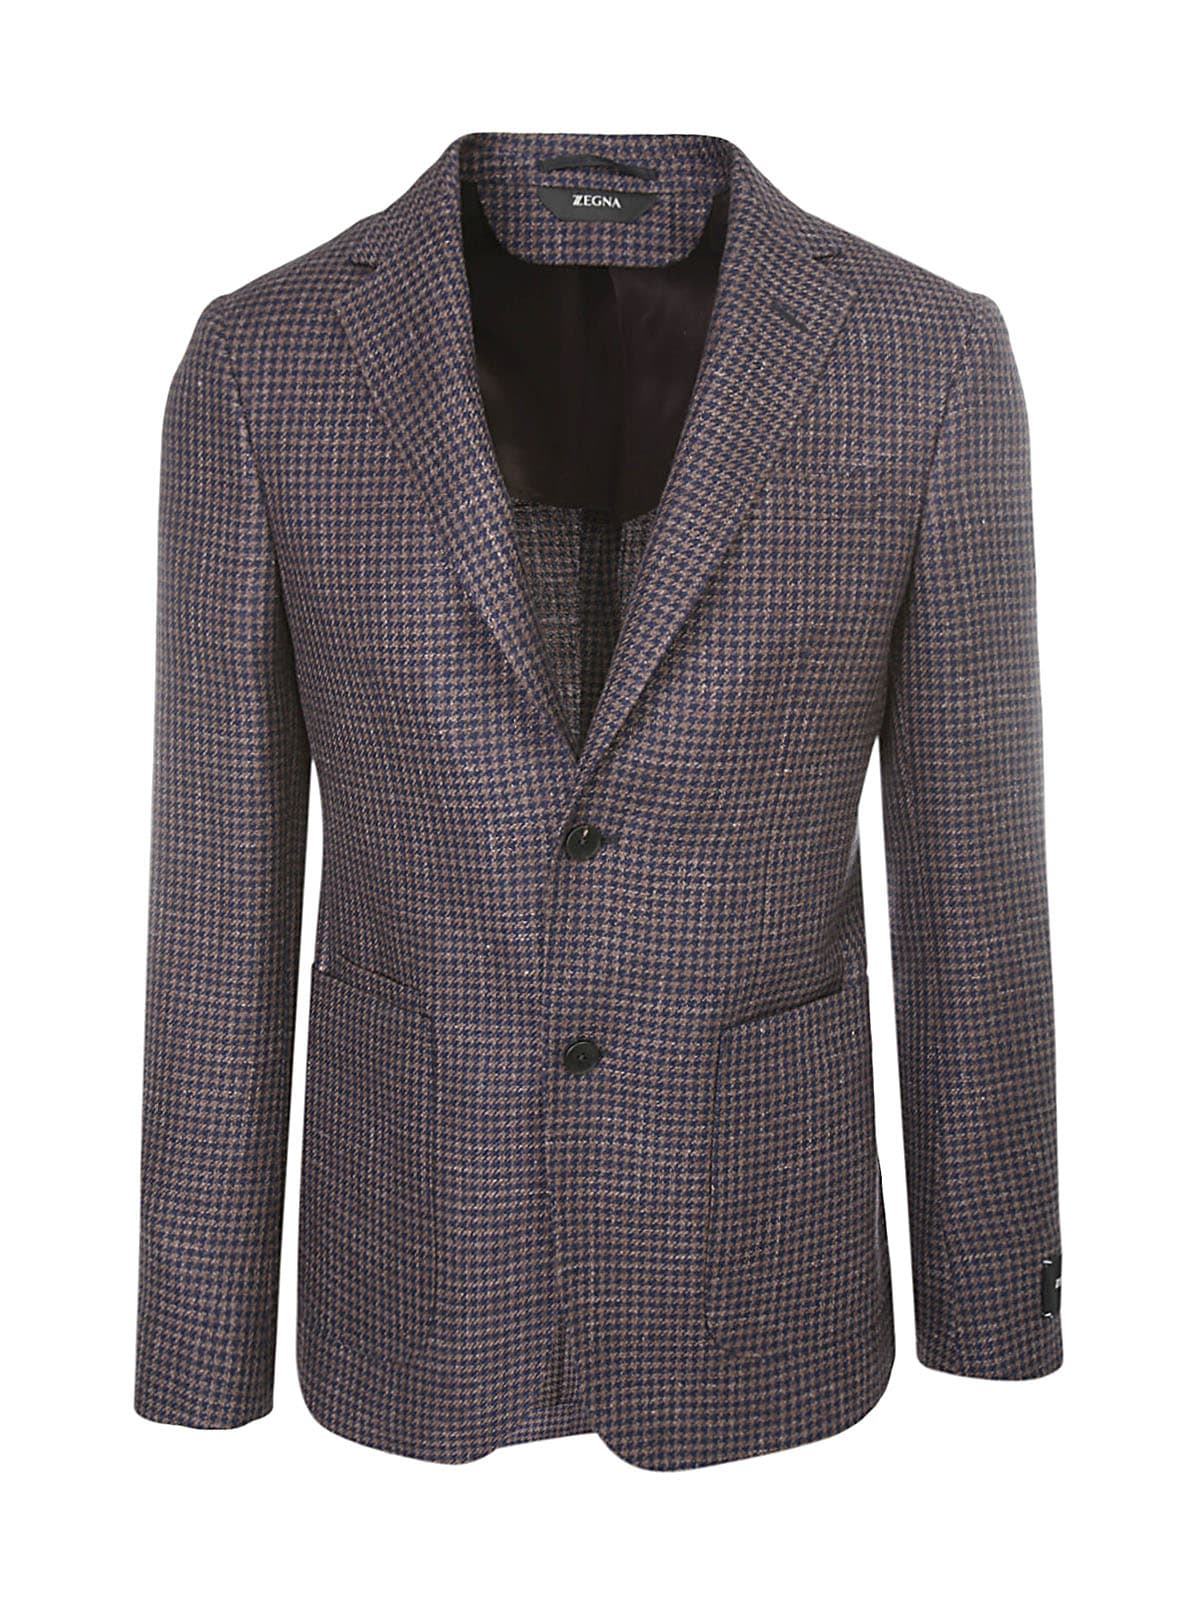 Z Zegna Textured Wool And Linen Jacket